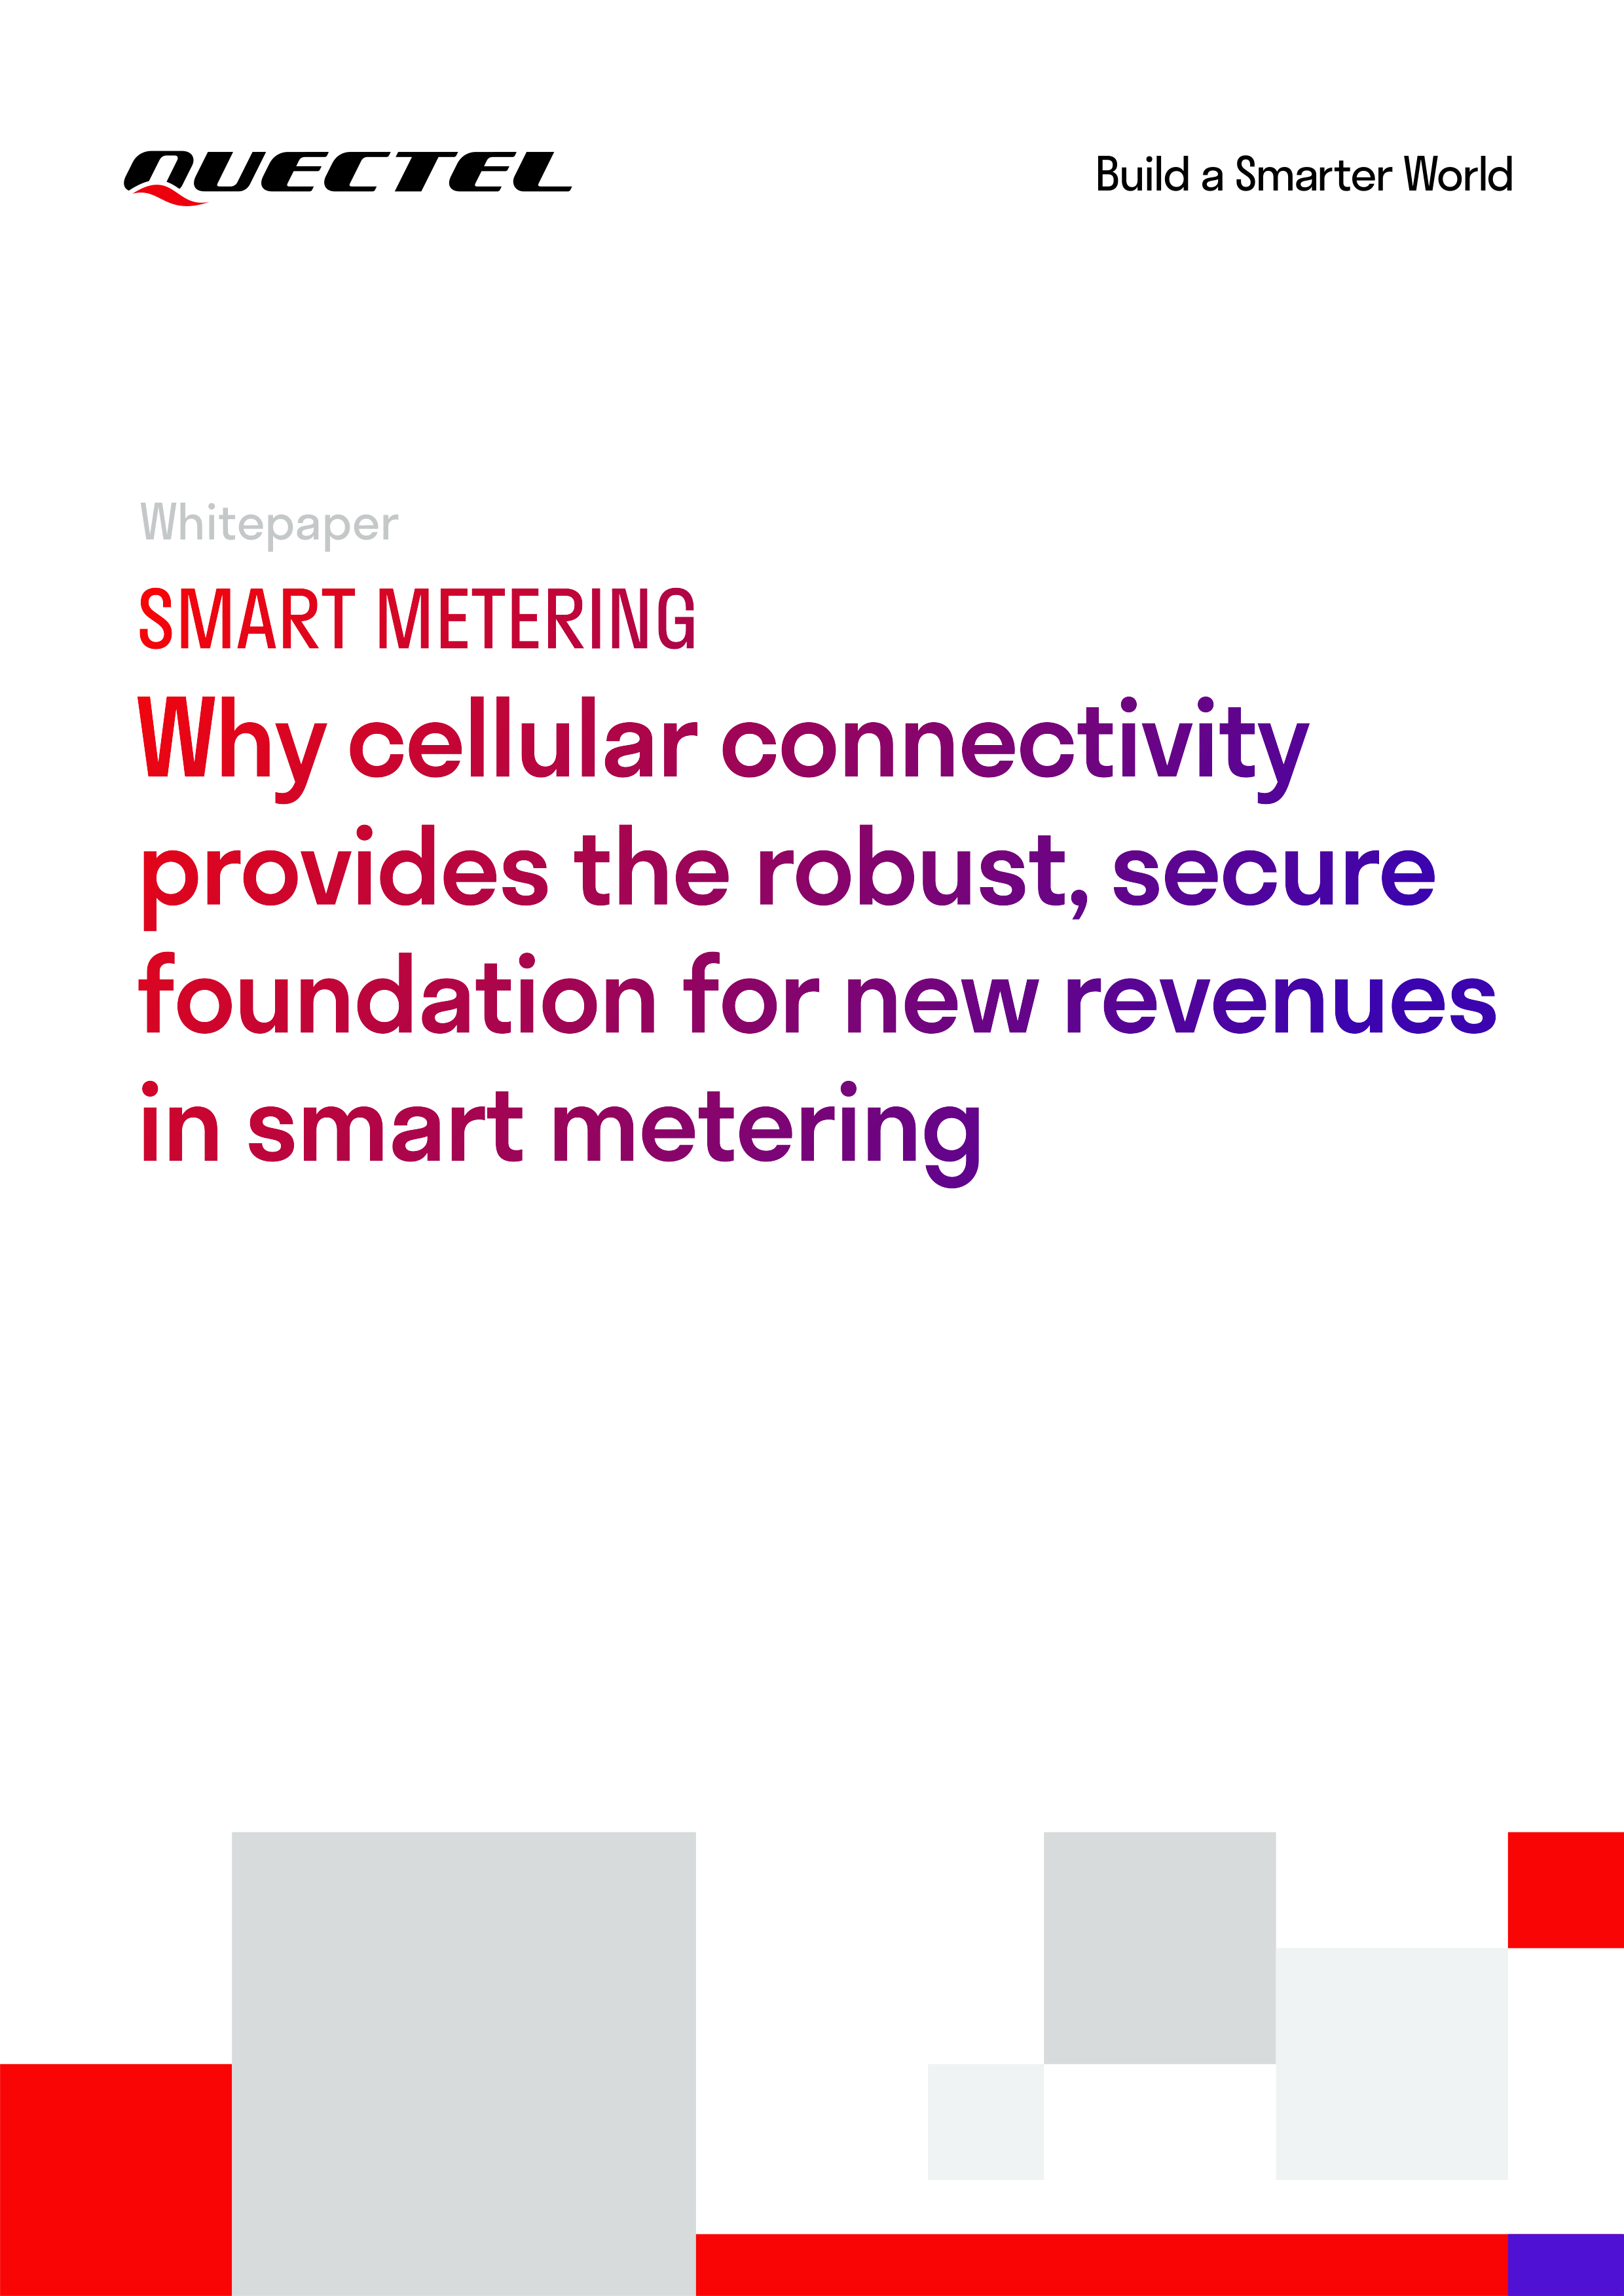 Why cellular connectivity provides the robust, secure foundation for new revenues in smart metering image